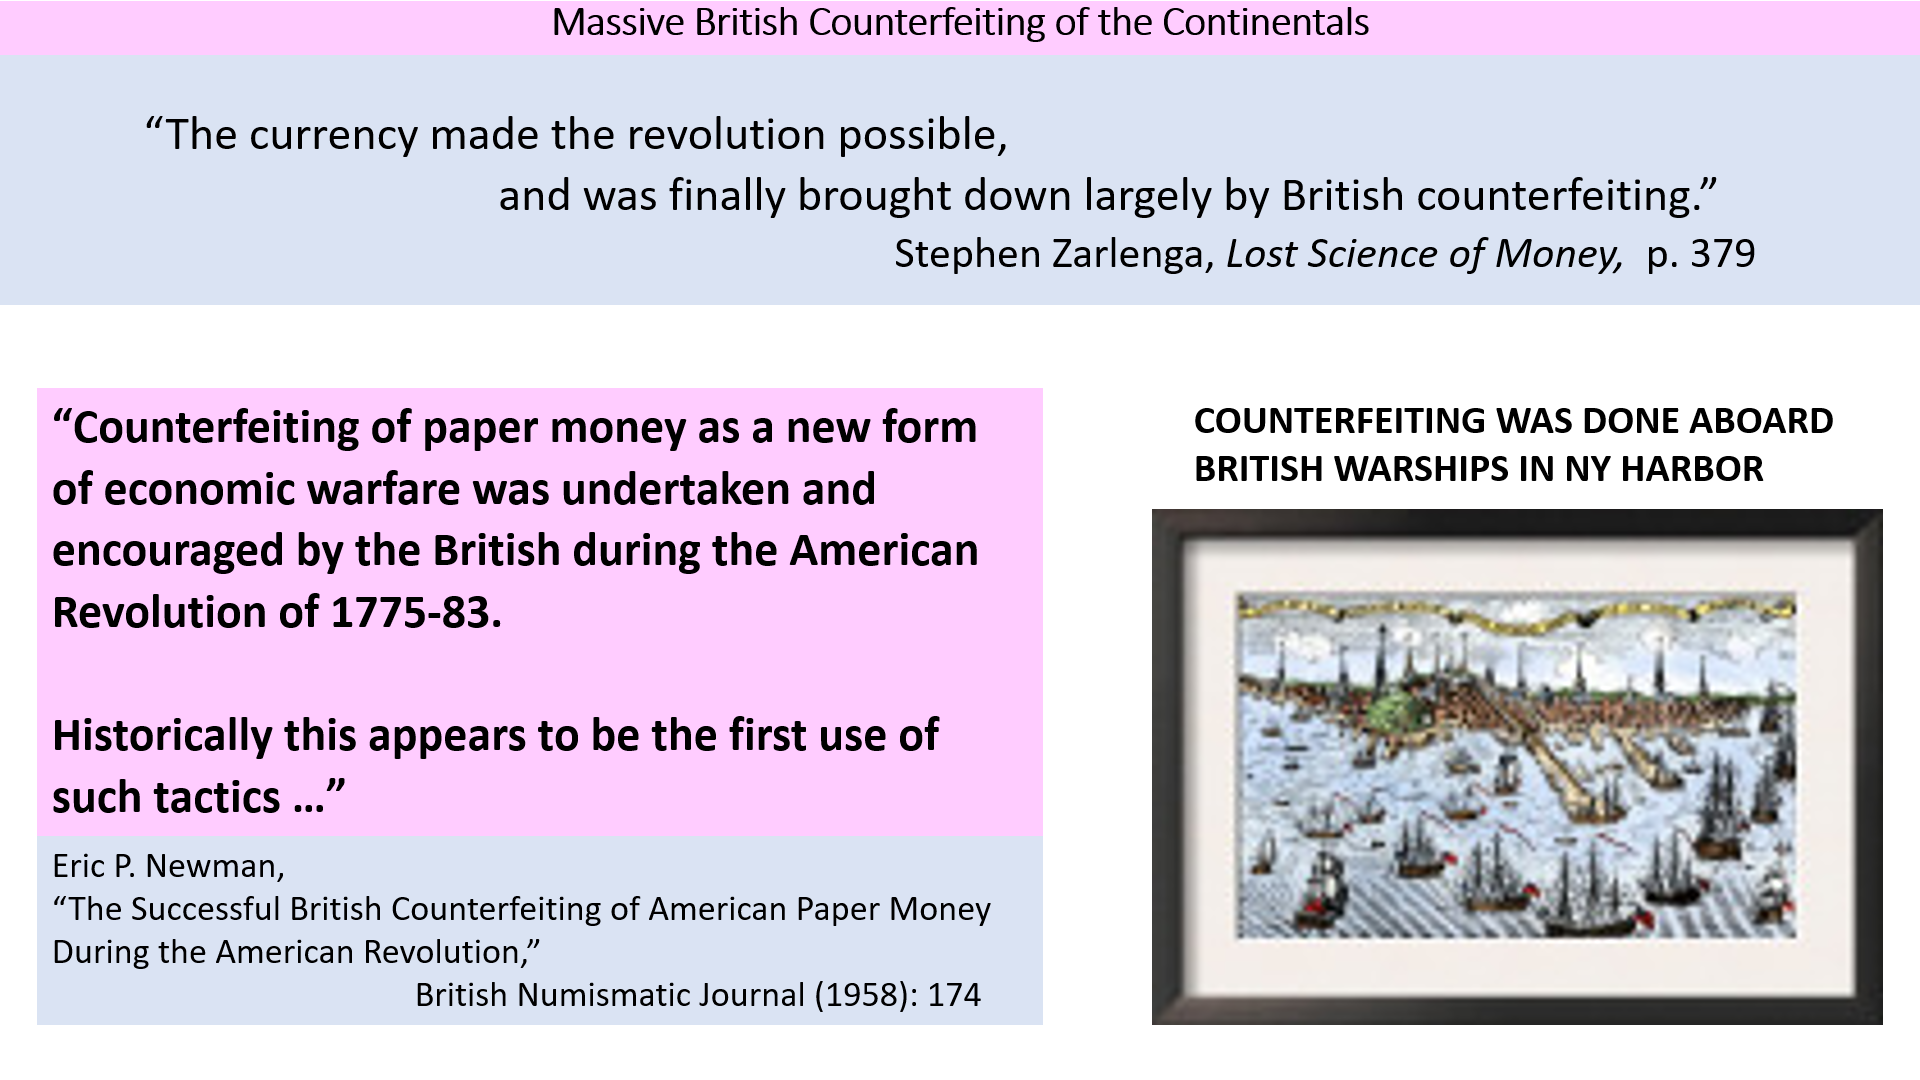 British counterfeiting destroyed the currency